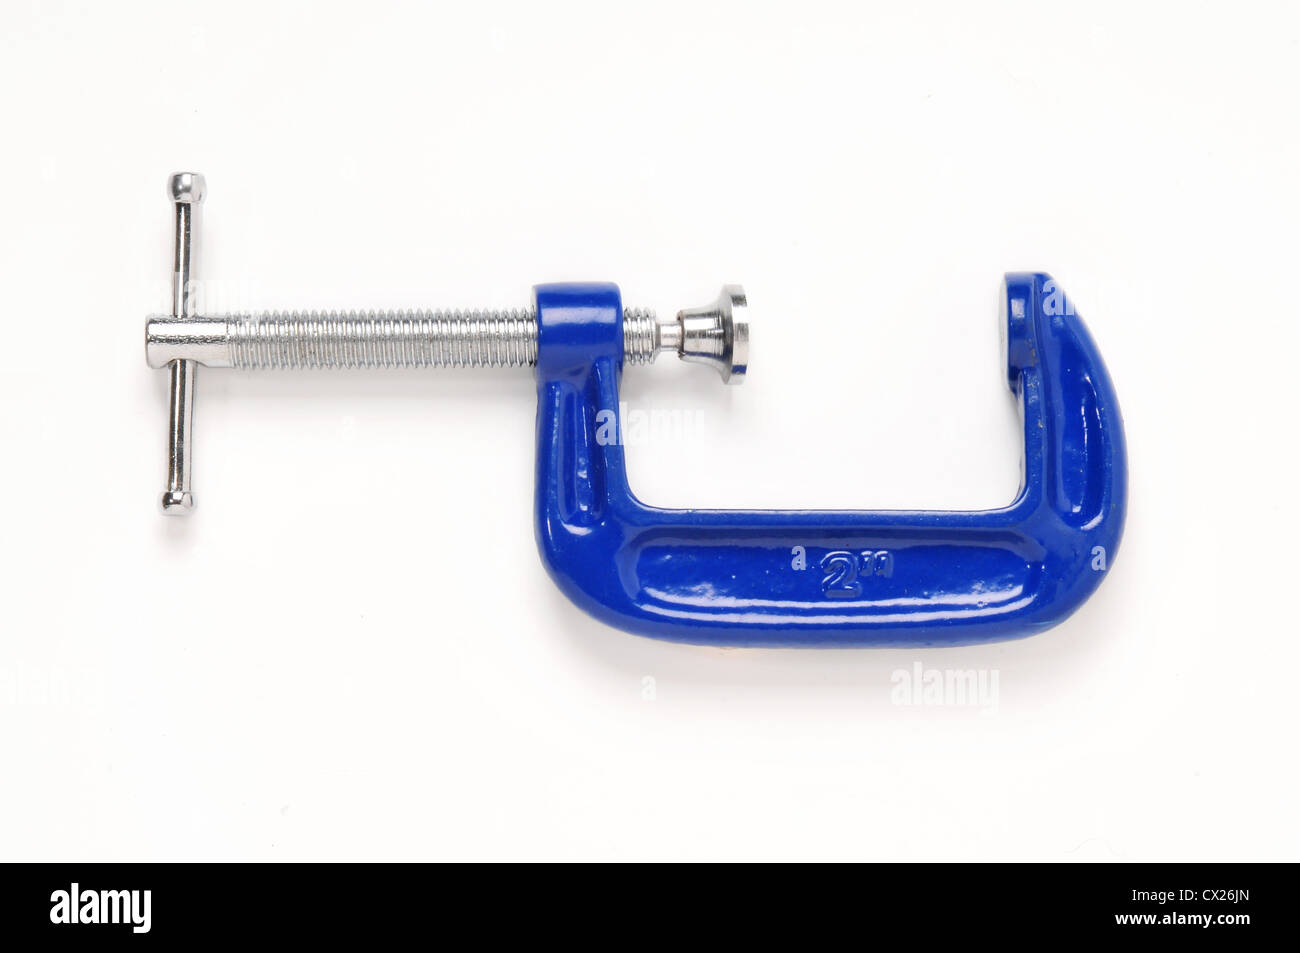 A blue G clamp open nearly fully and shot from above Stock Photo